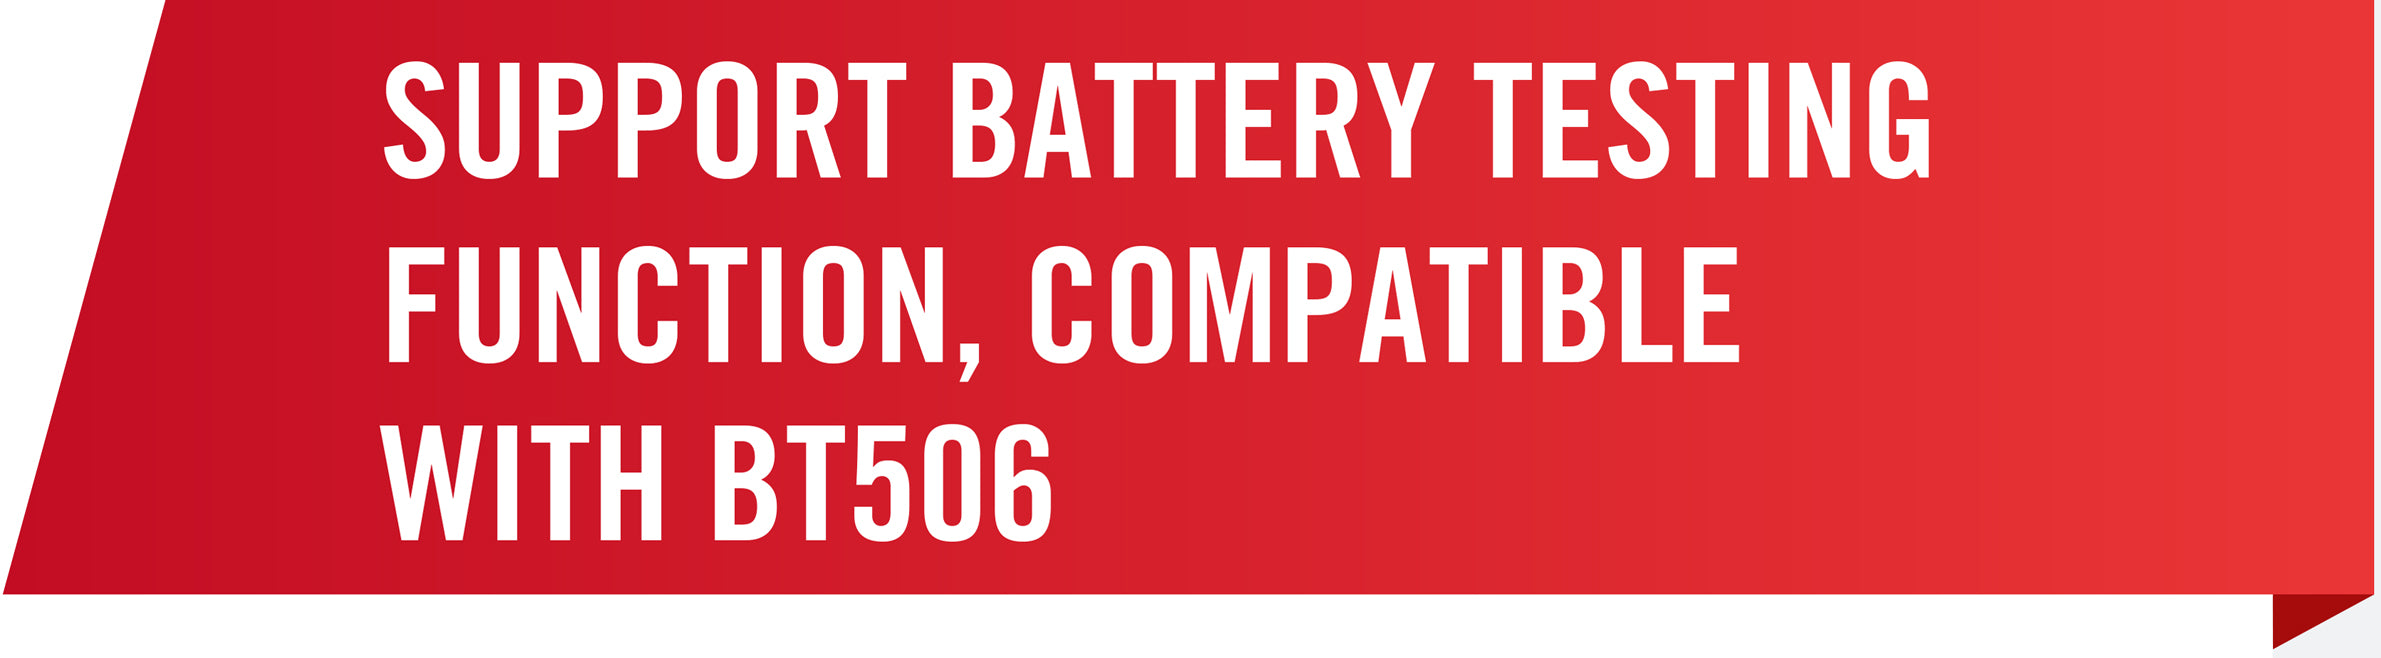 Suport Battery Test Functions Compatible with Battery Tester BT506